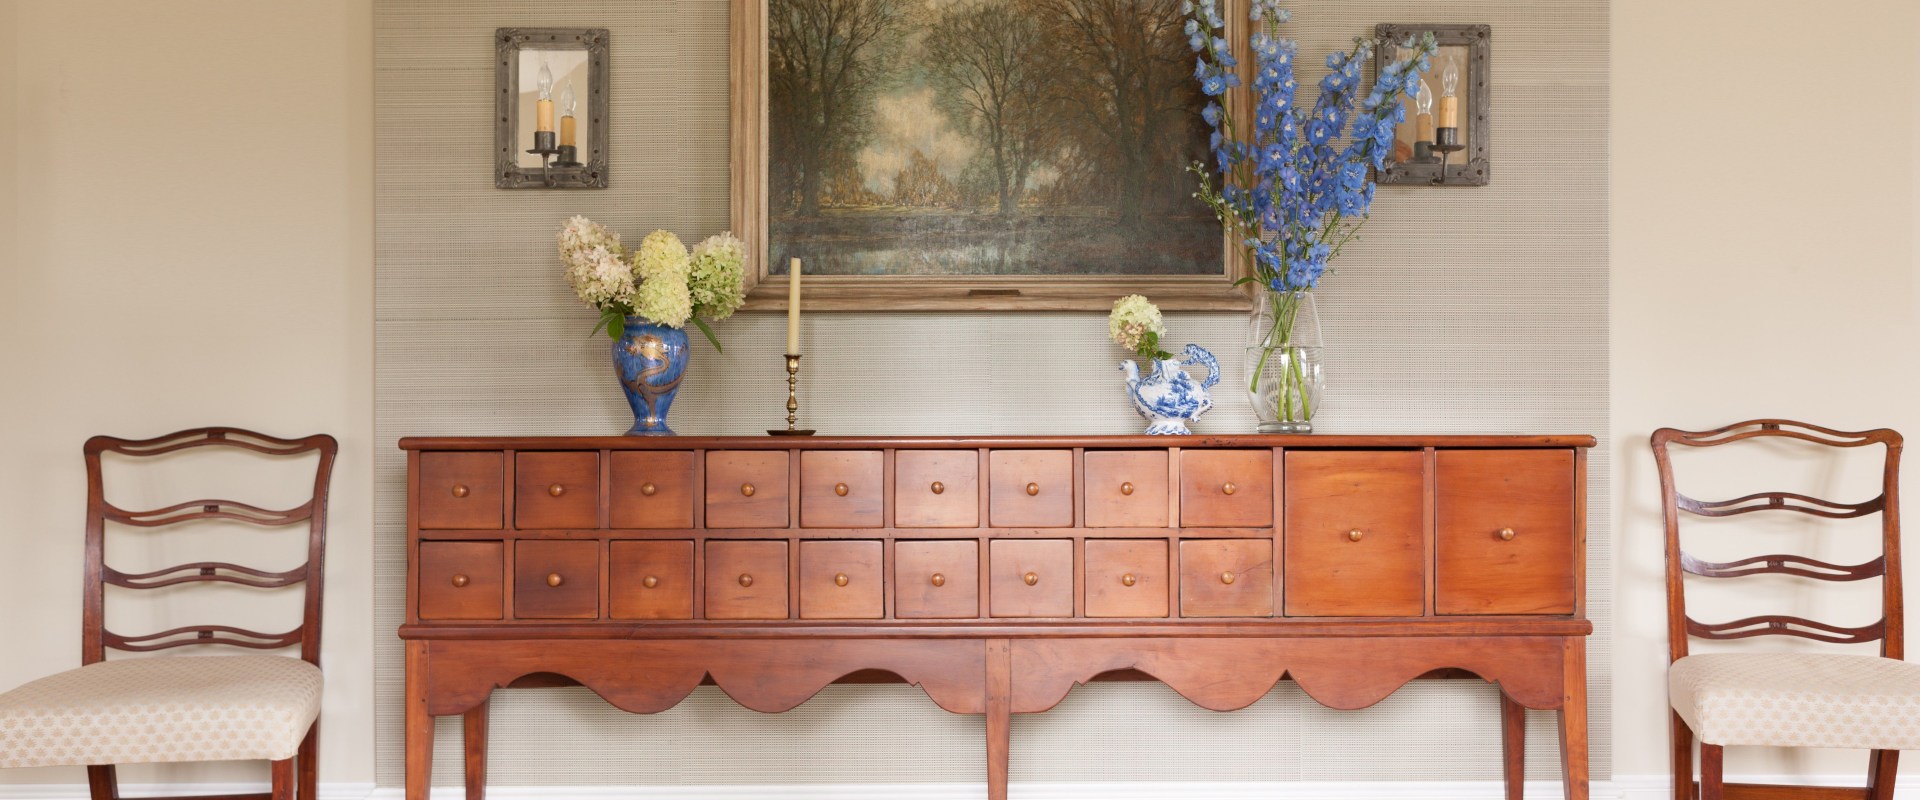 What types of accessories work best when incorporating vintage elements into your décor?